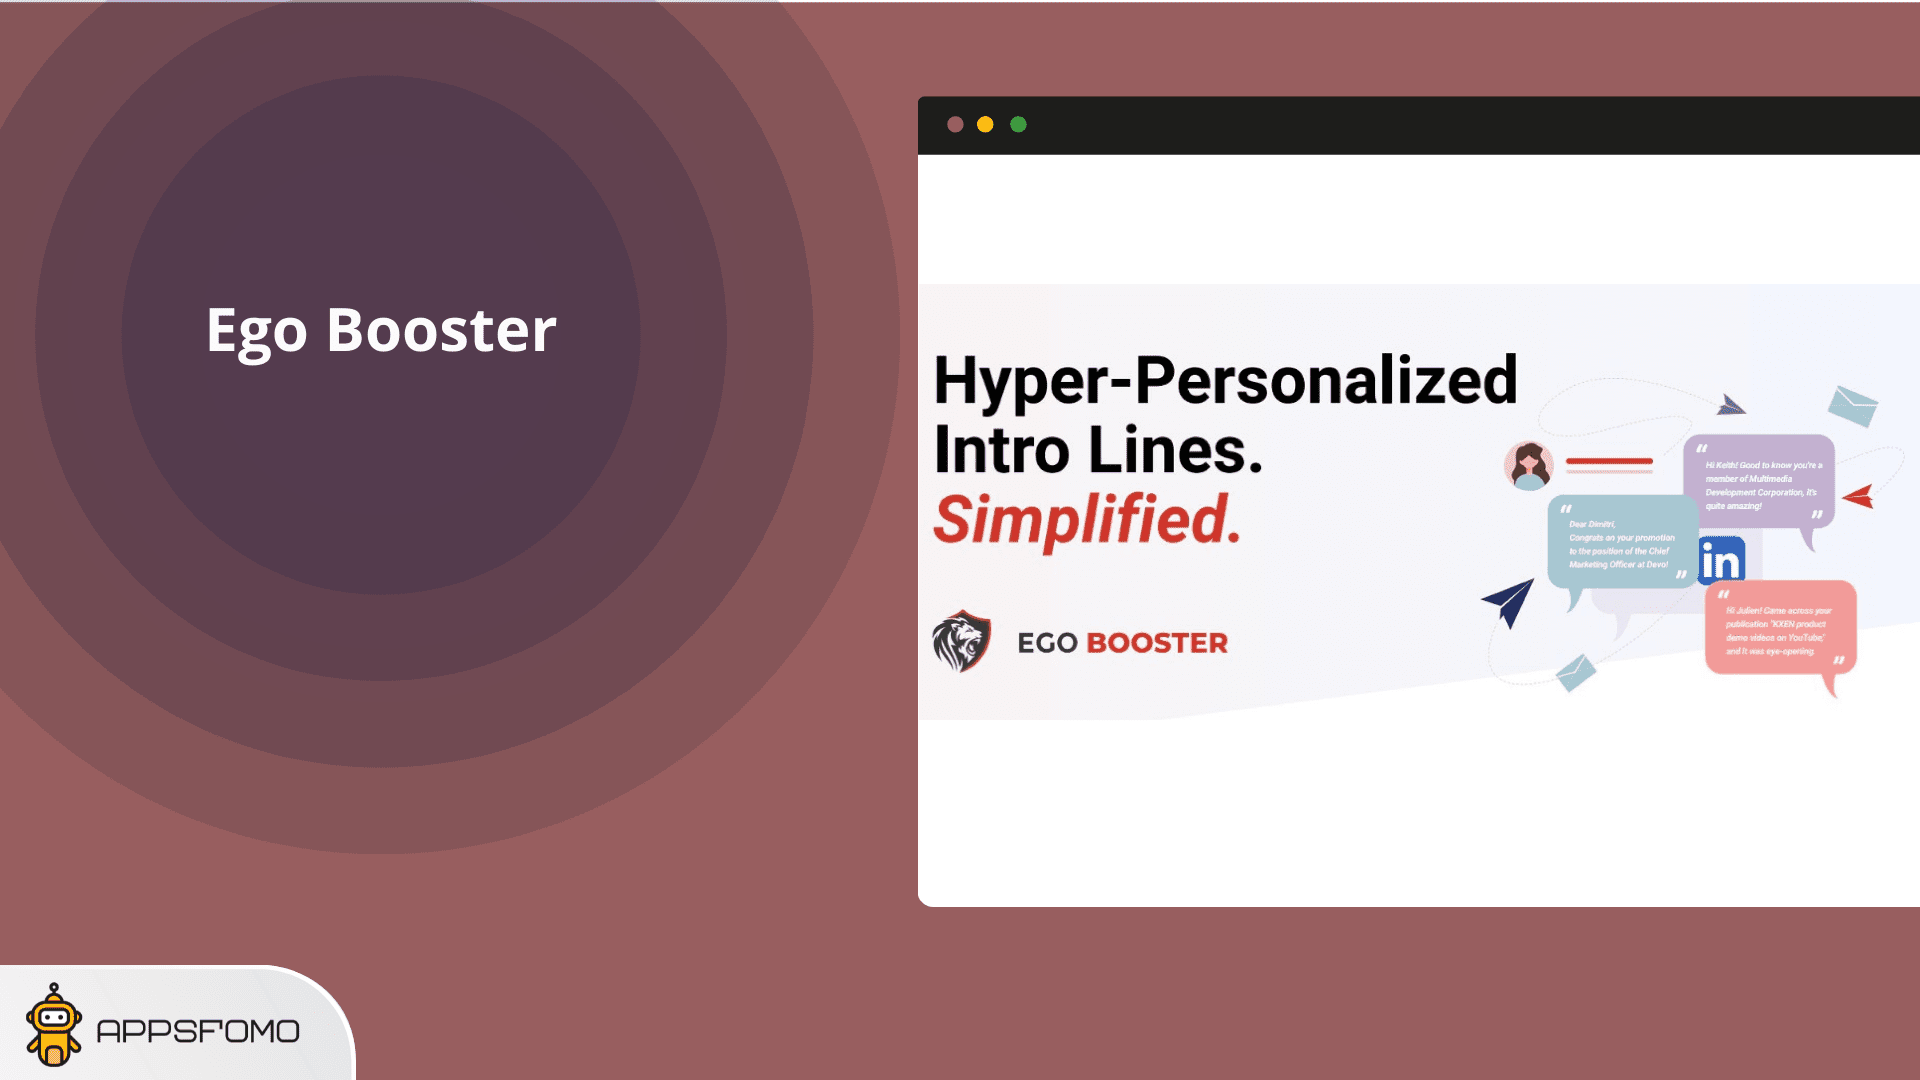 egobooster featured image